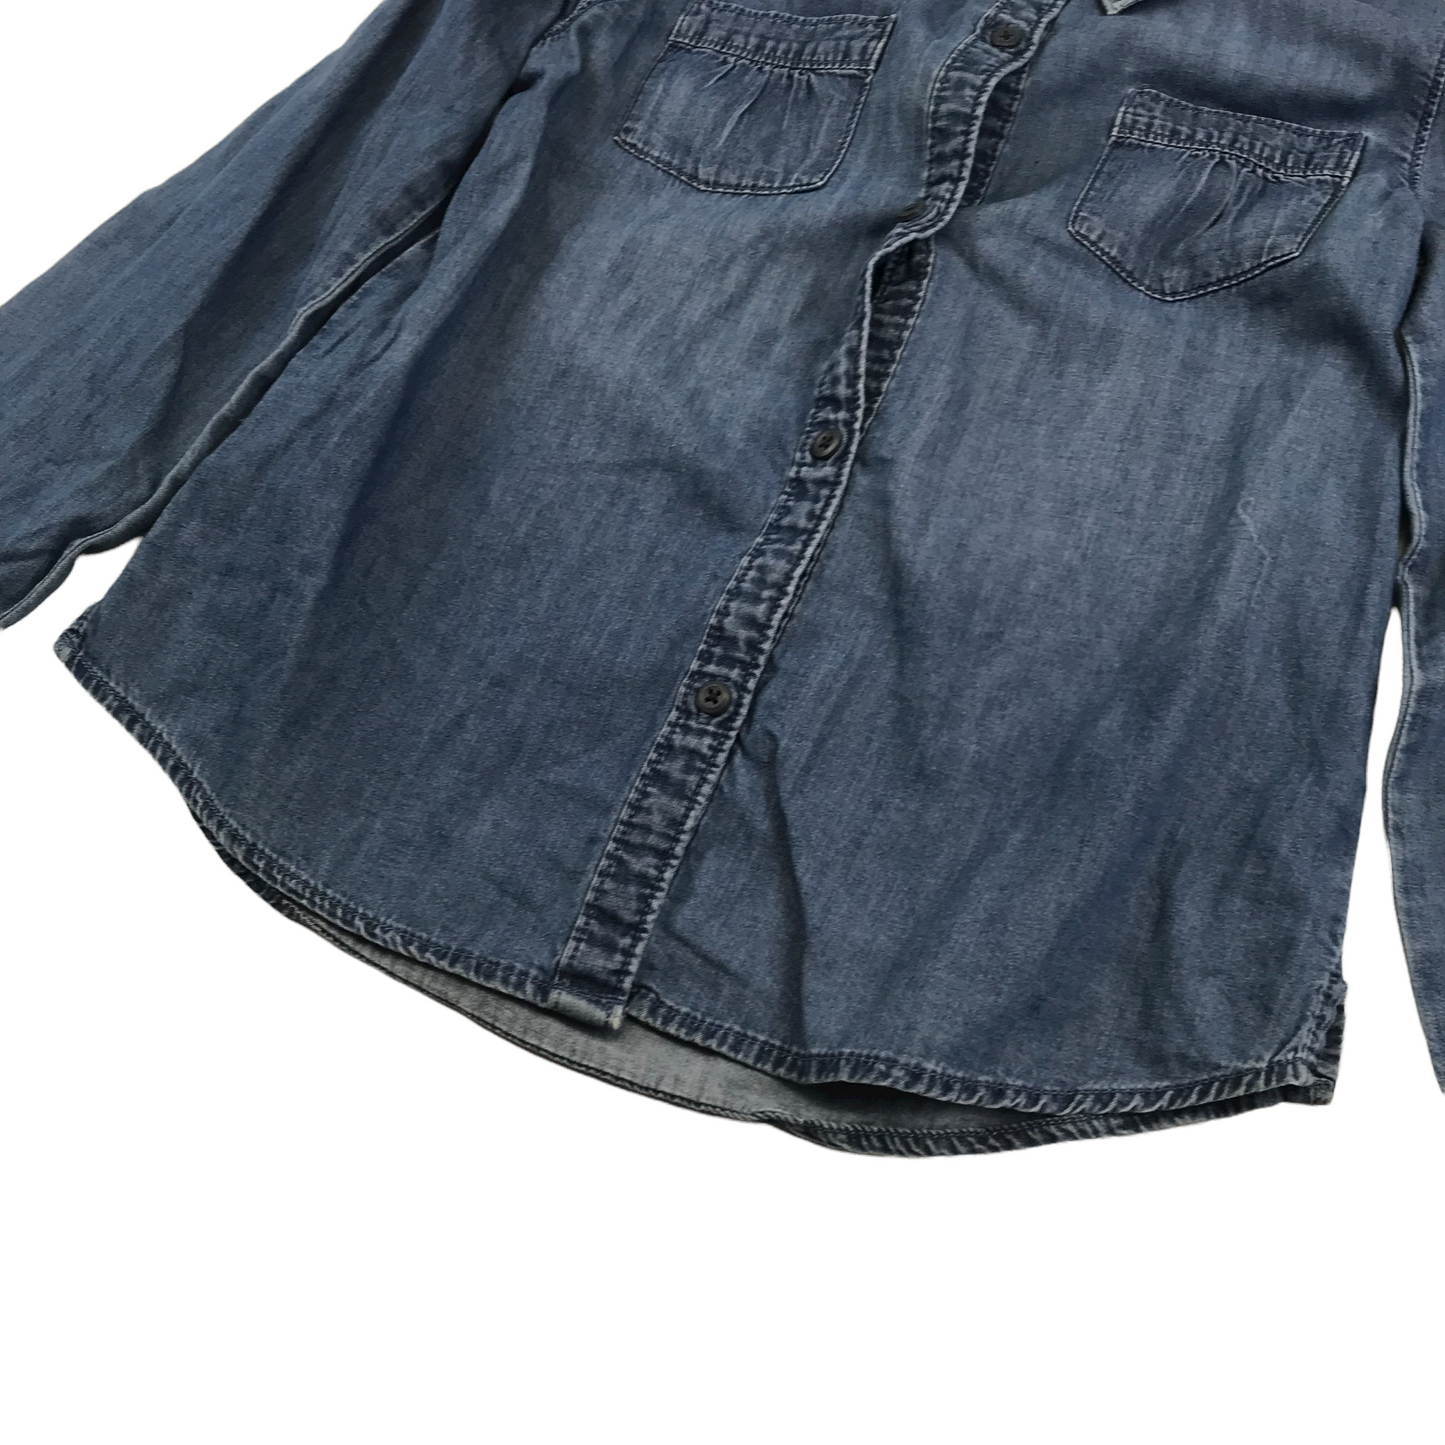 GAP Blue Denim-style Shirt with Pleated Pocket Details Age 10